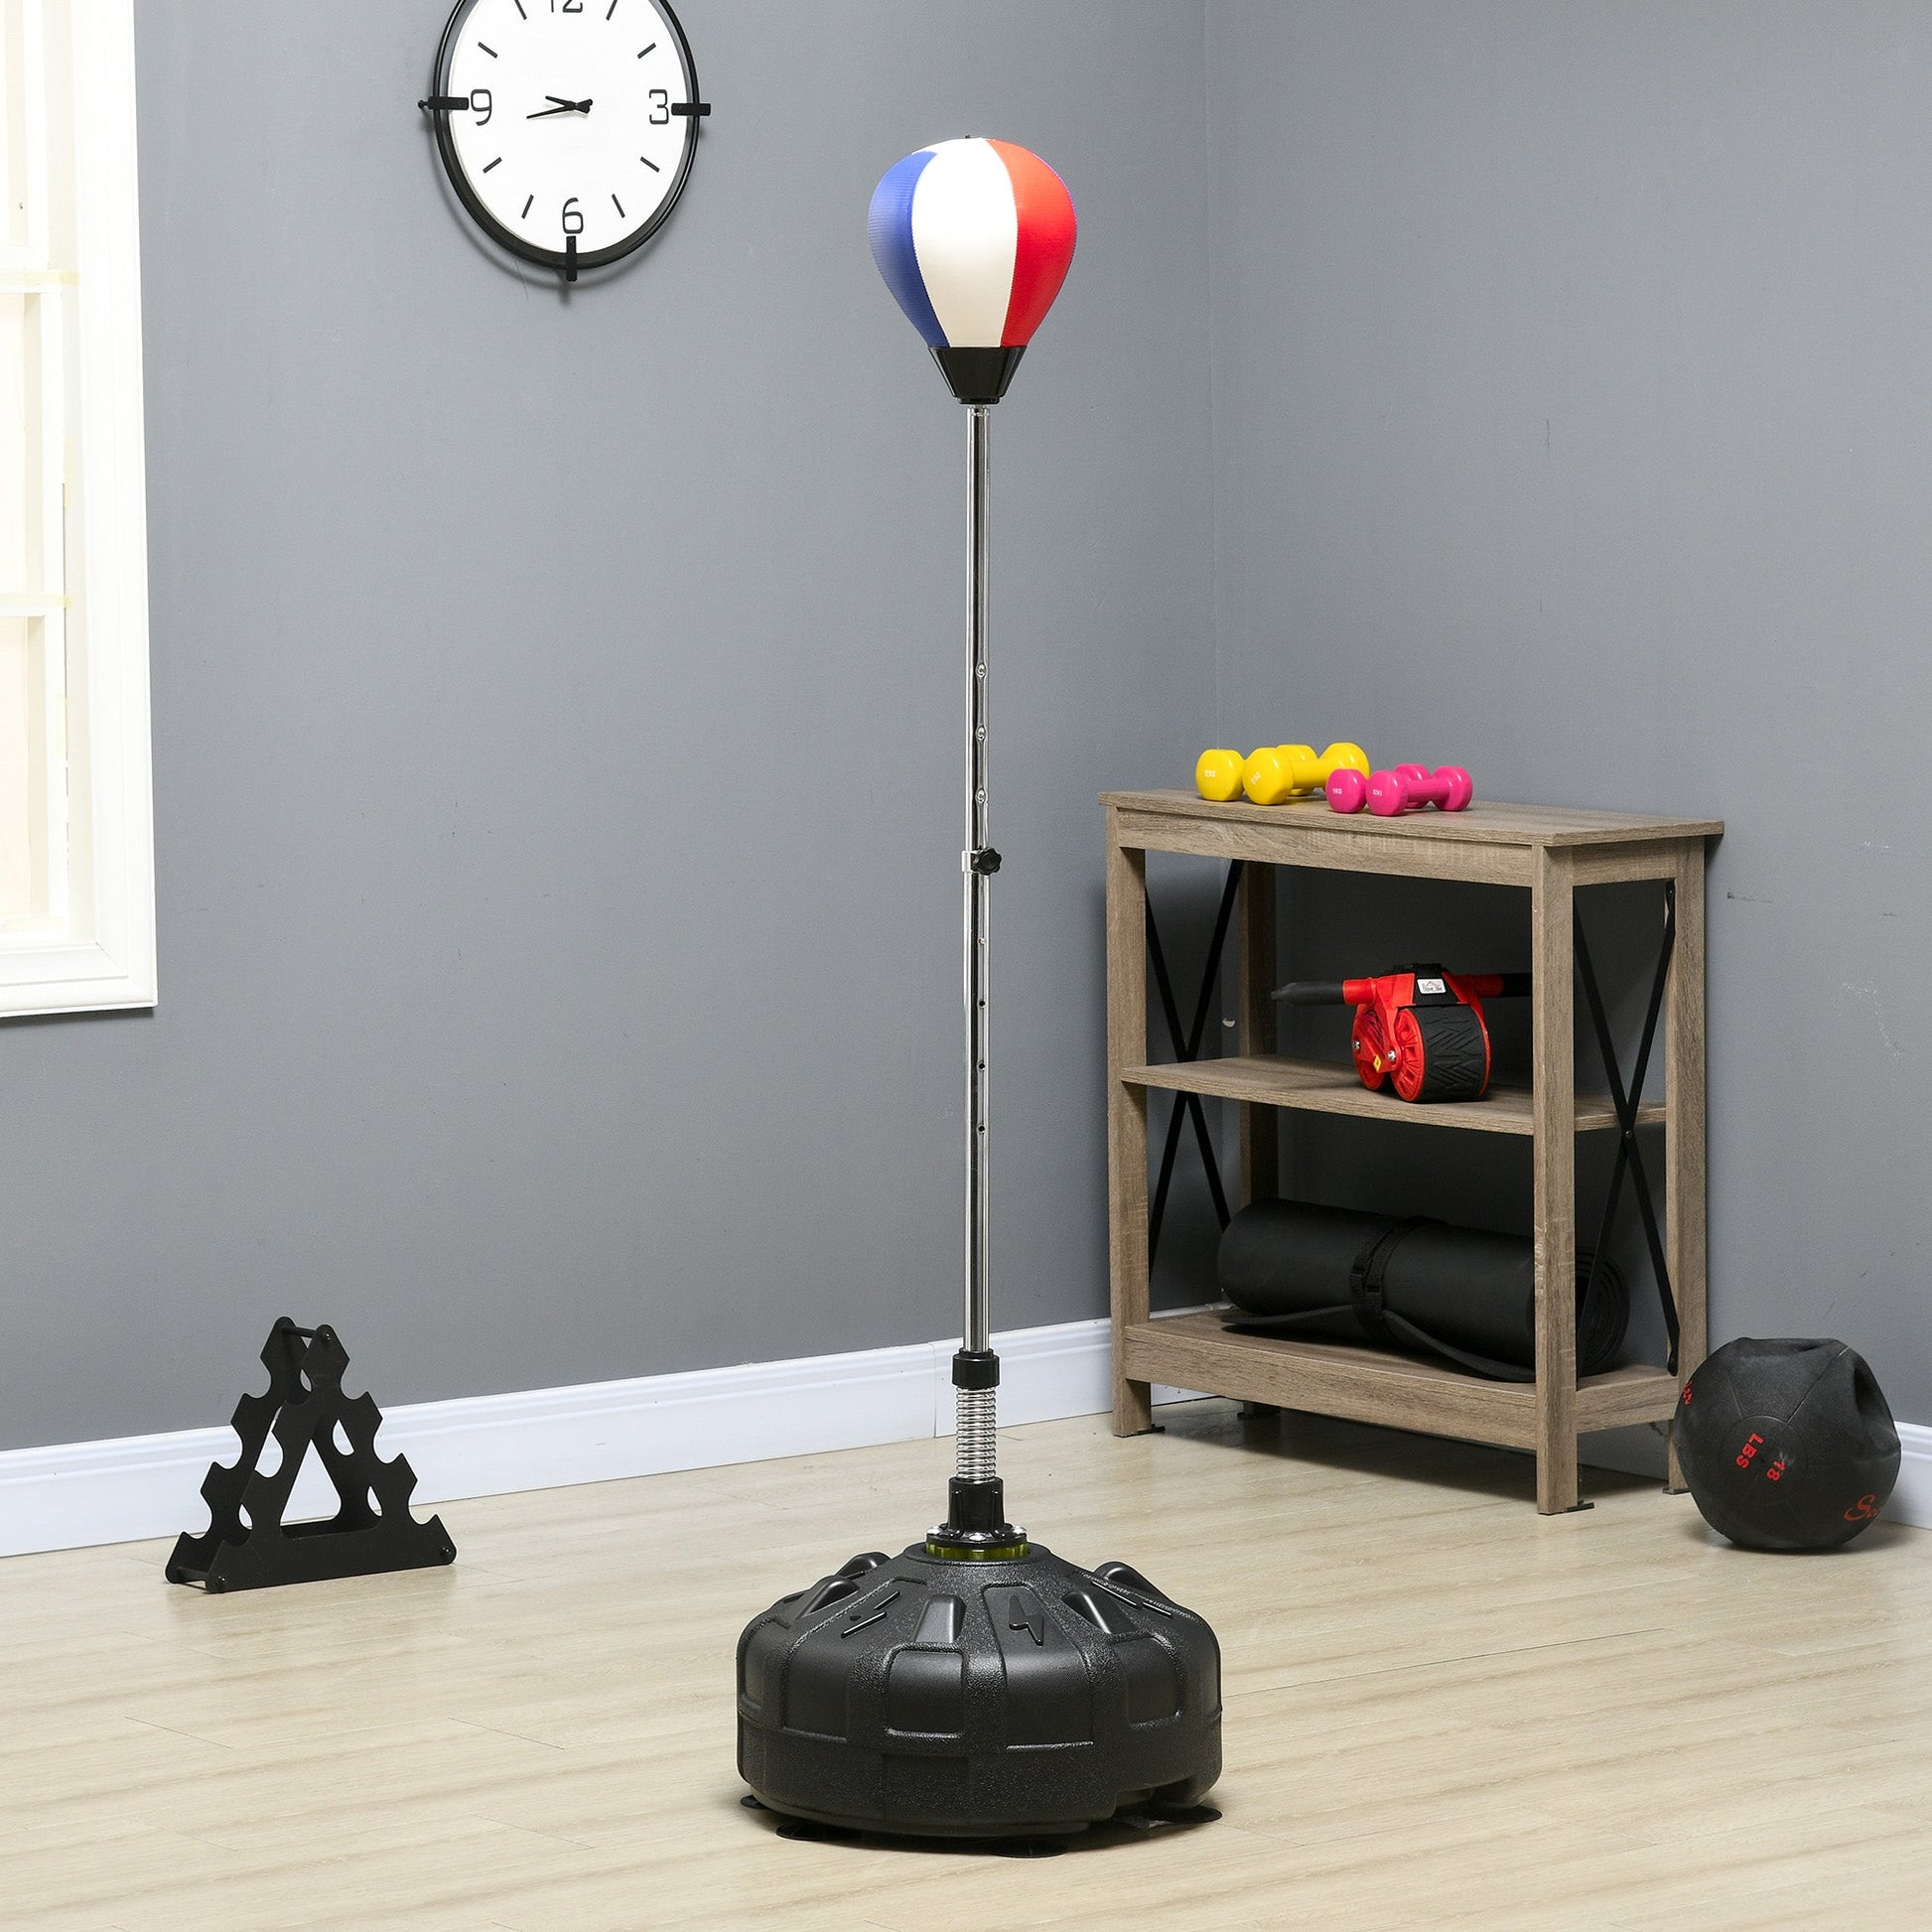 Reflex Bag, Speed Bag with Stand, 57.9" -65" Height Adjustable, for Home Gym Boxing Training at Gallery Canada